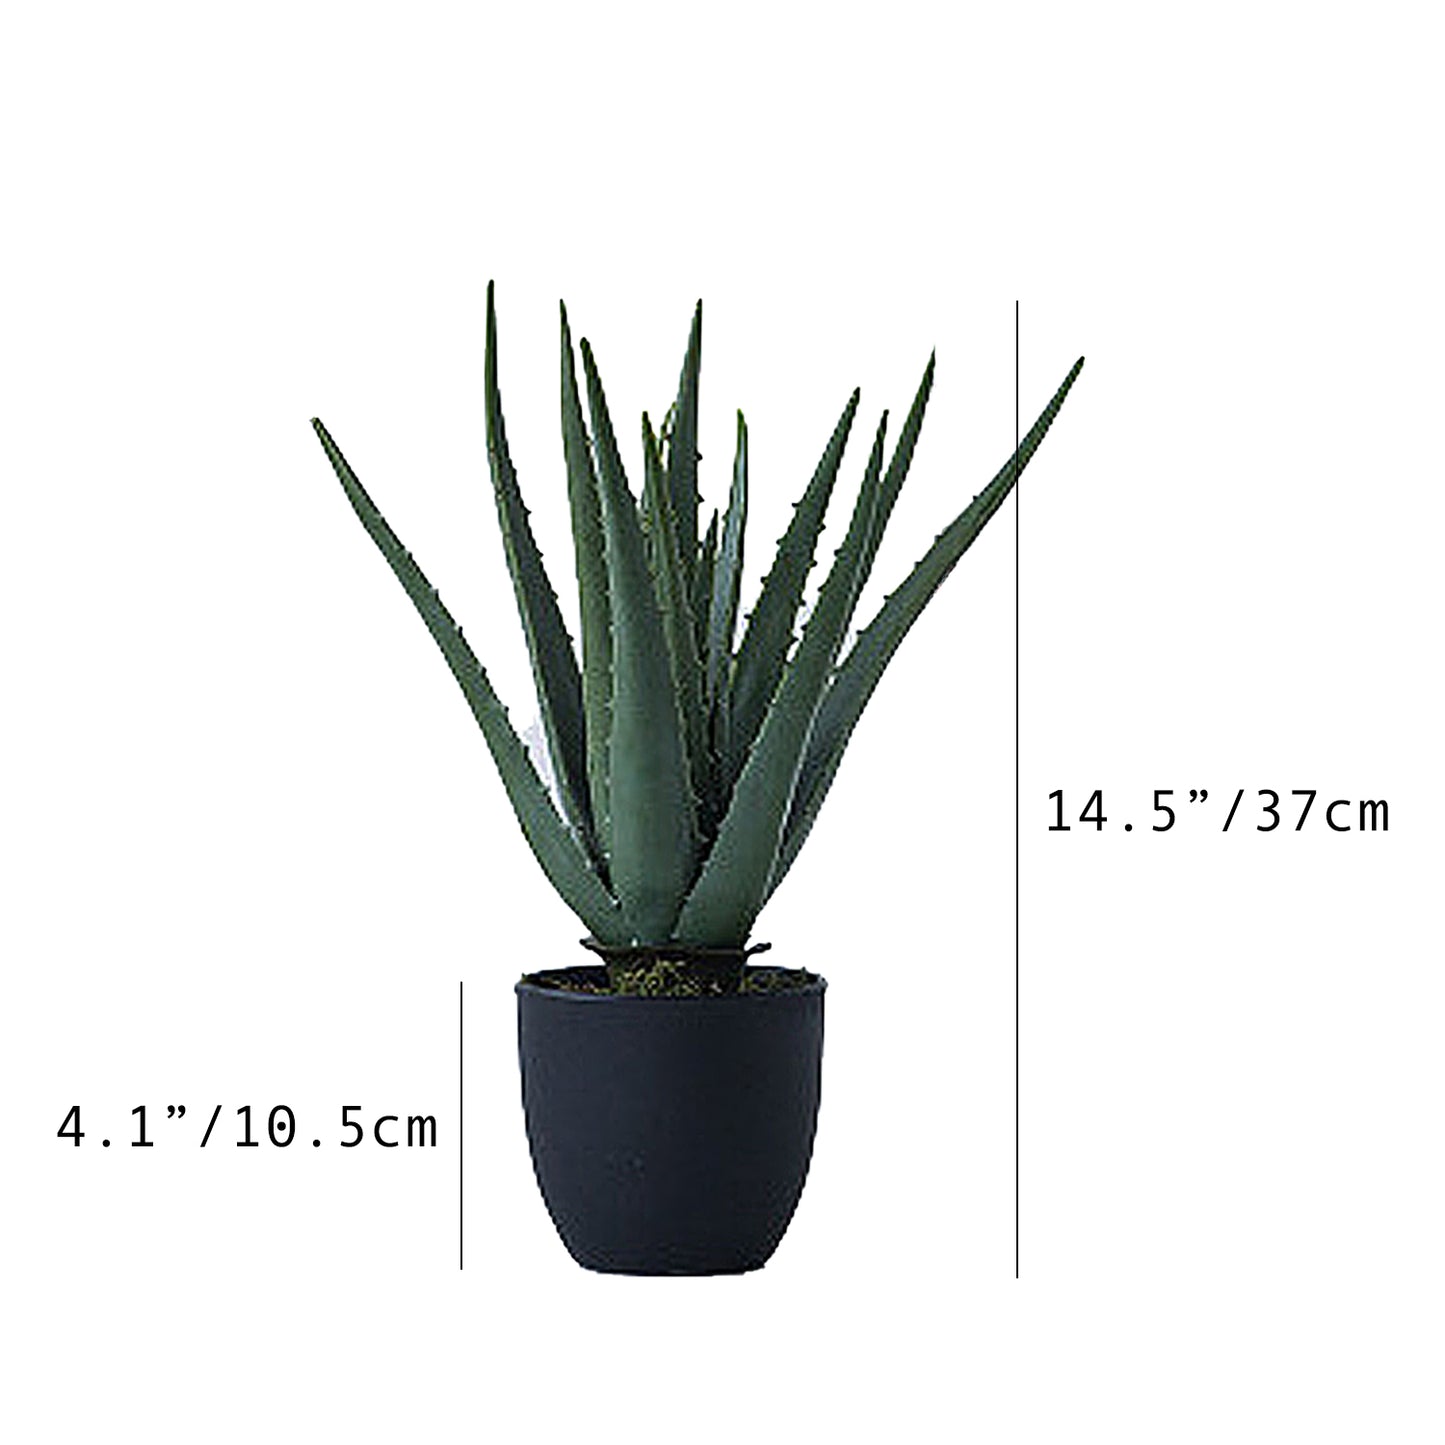 Potted Artificial Agave Plant